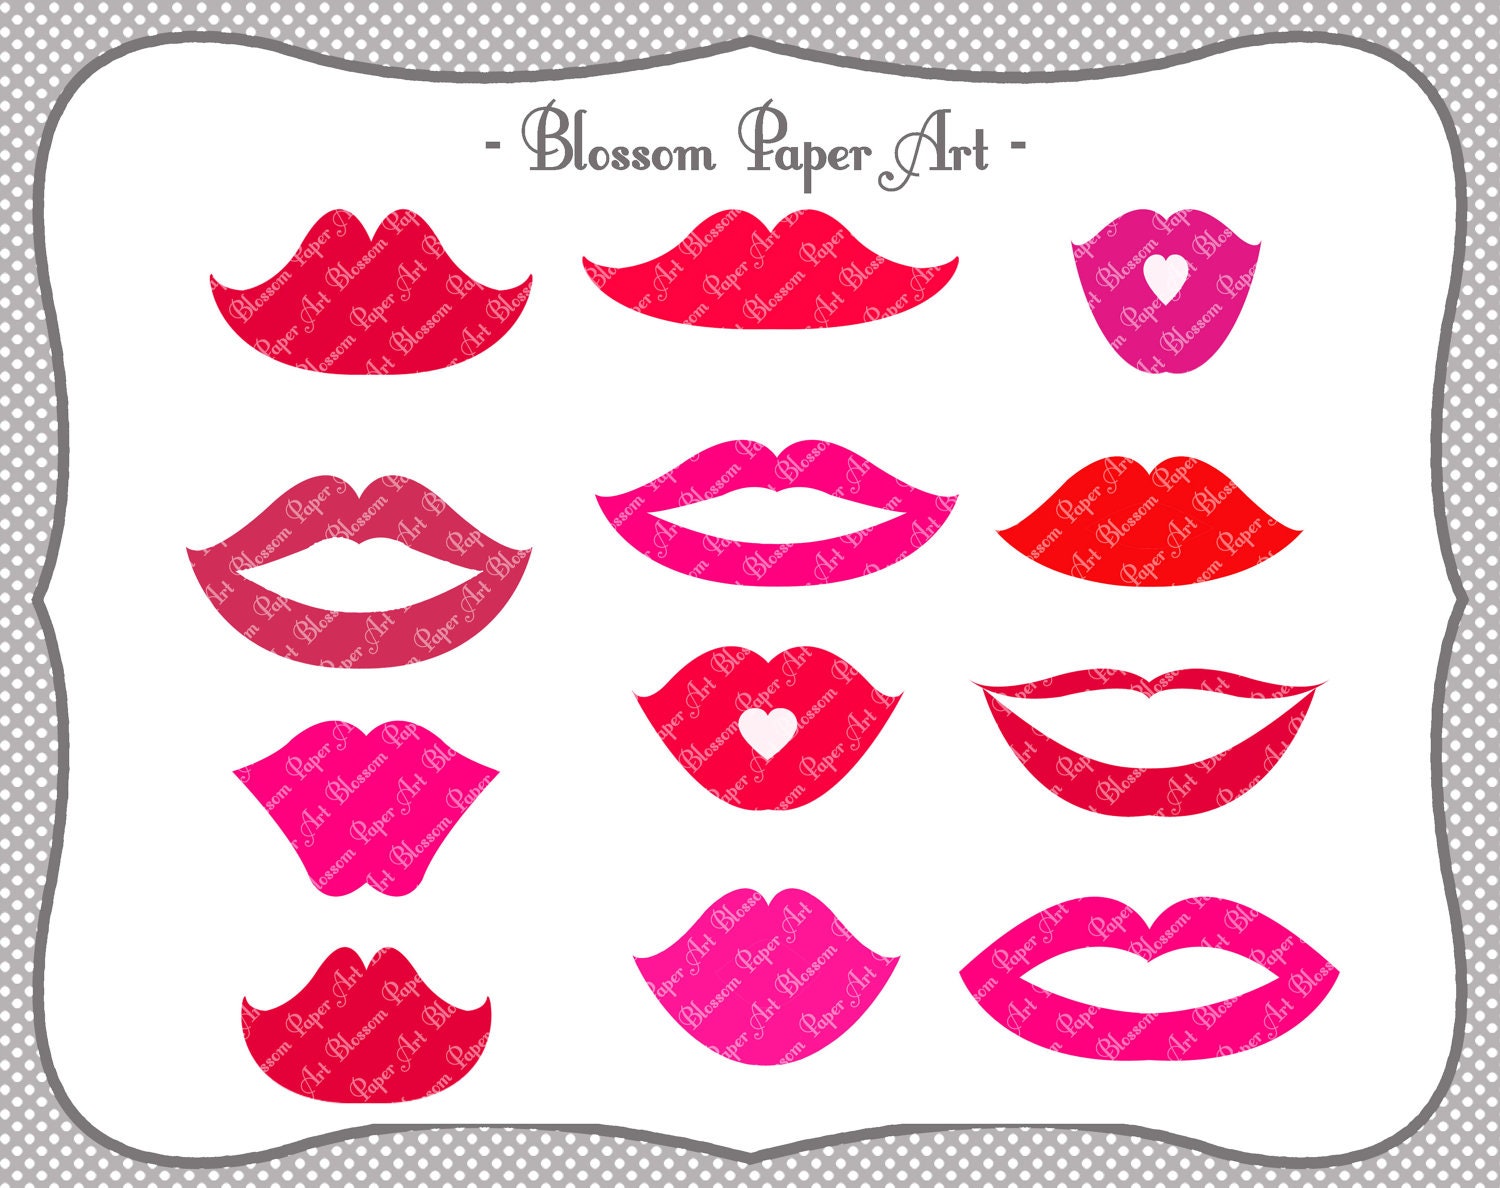 free photo booth clipart - photo #36